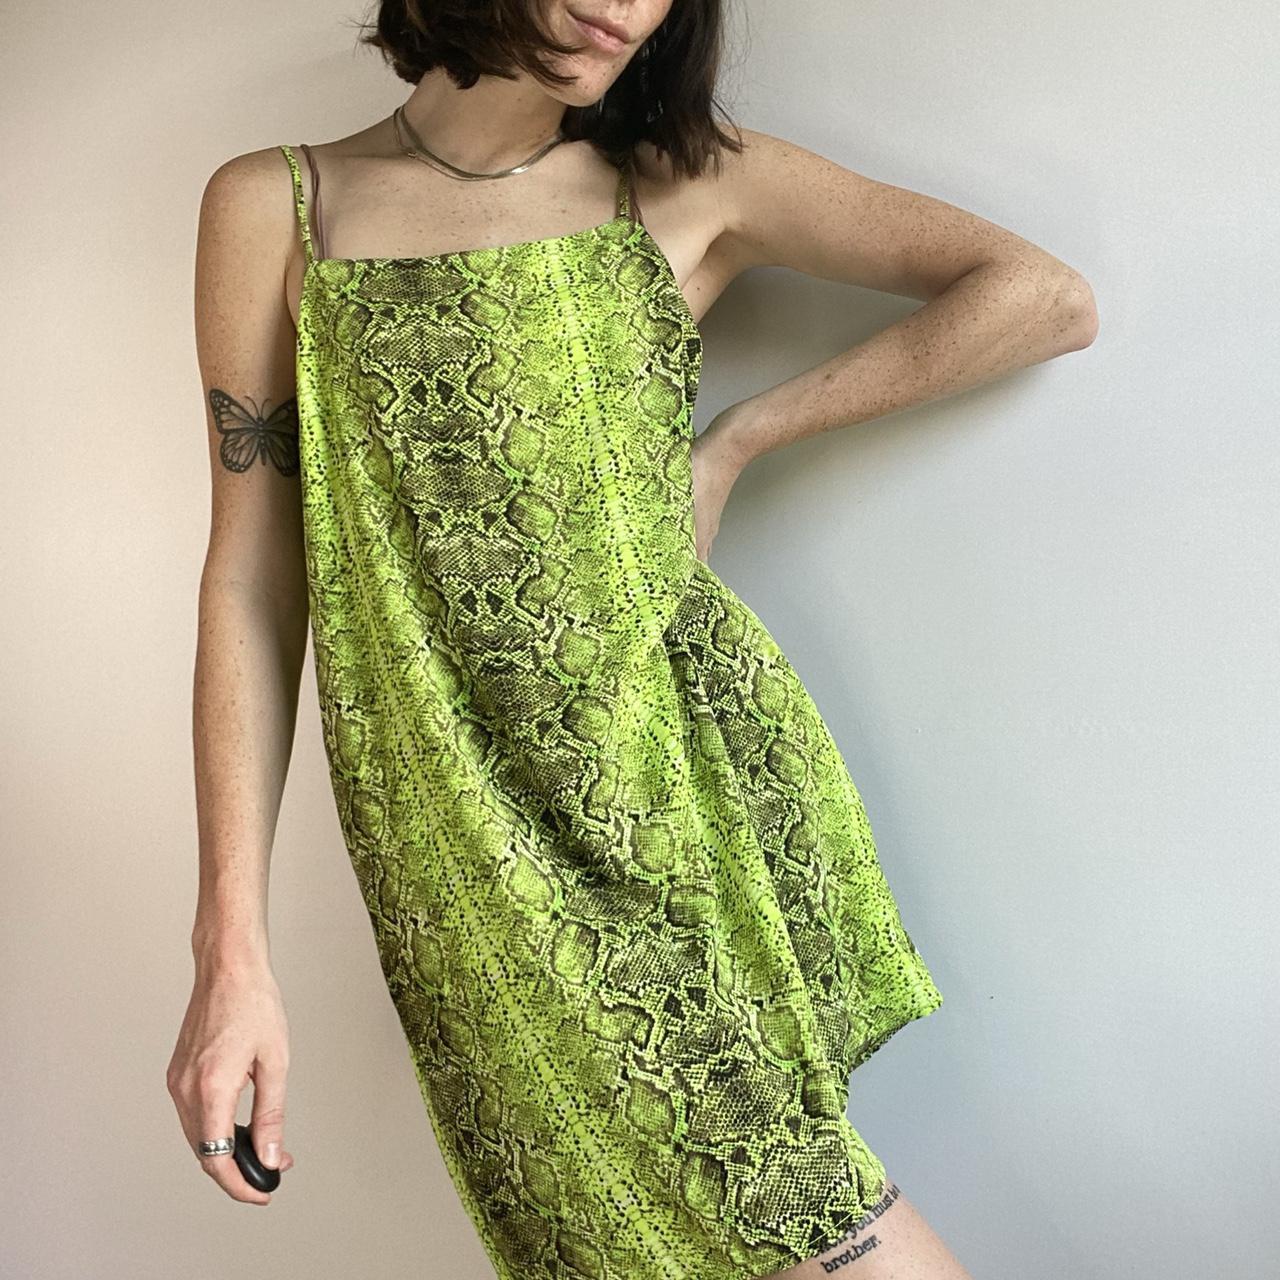 Product Image 4 - Lime Green snake print Dress

Size